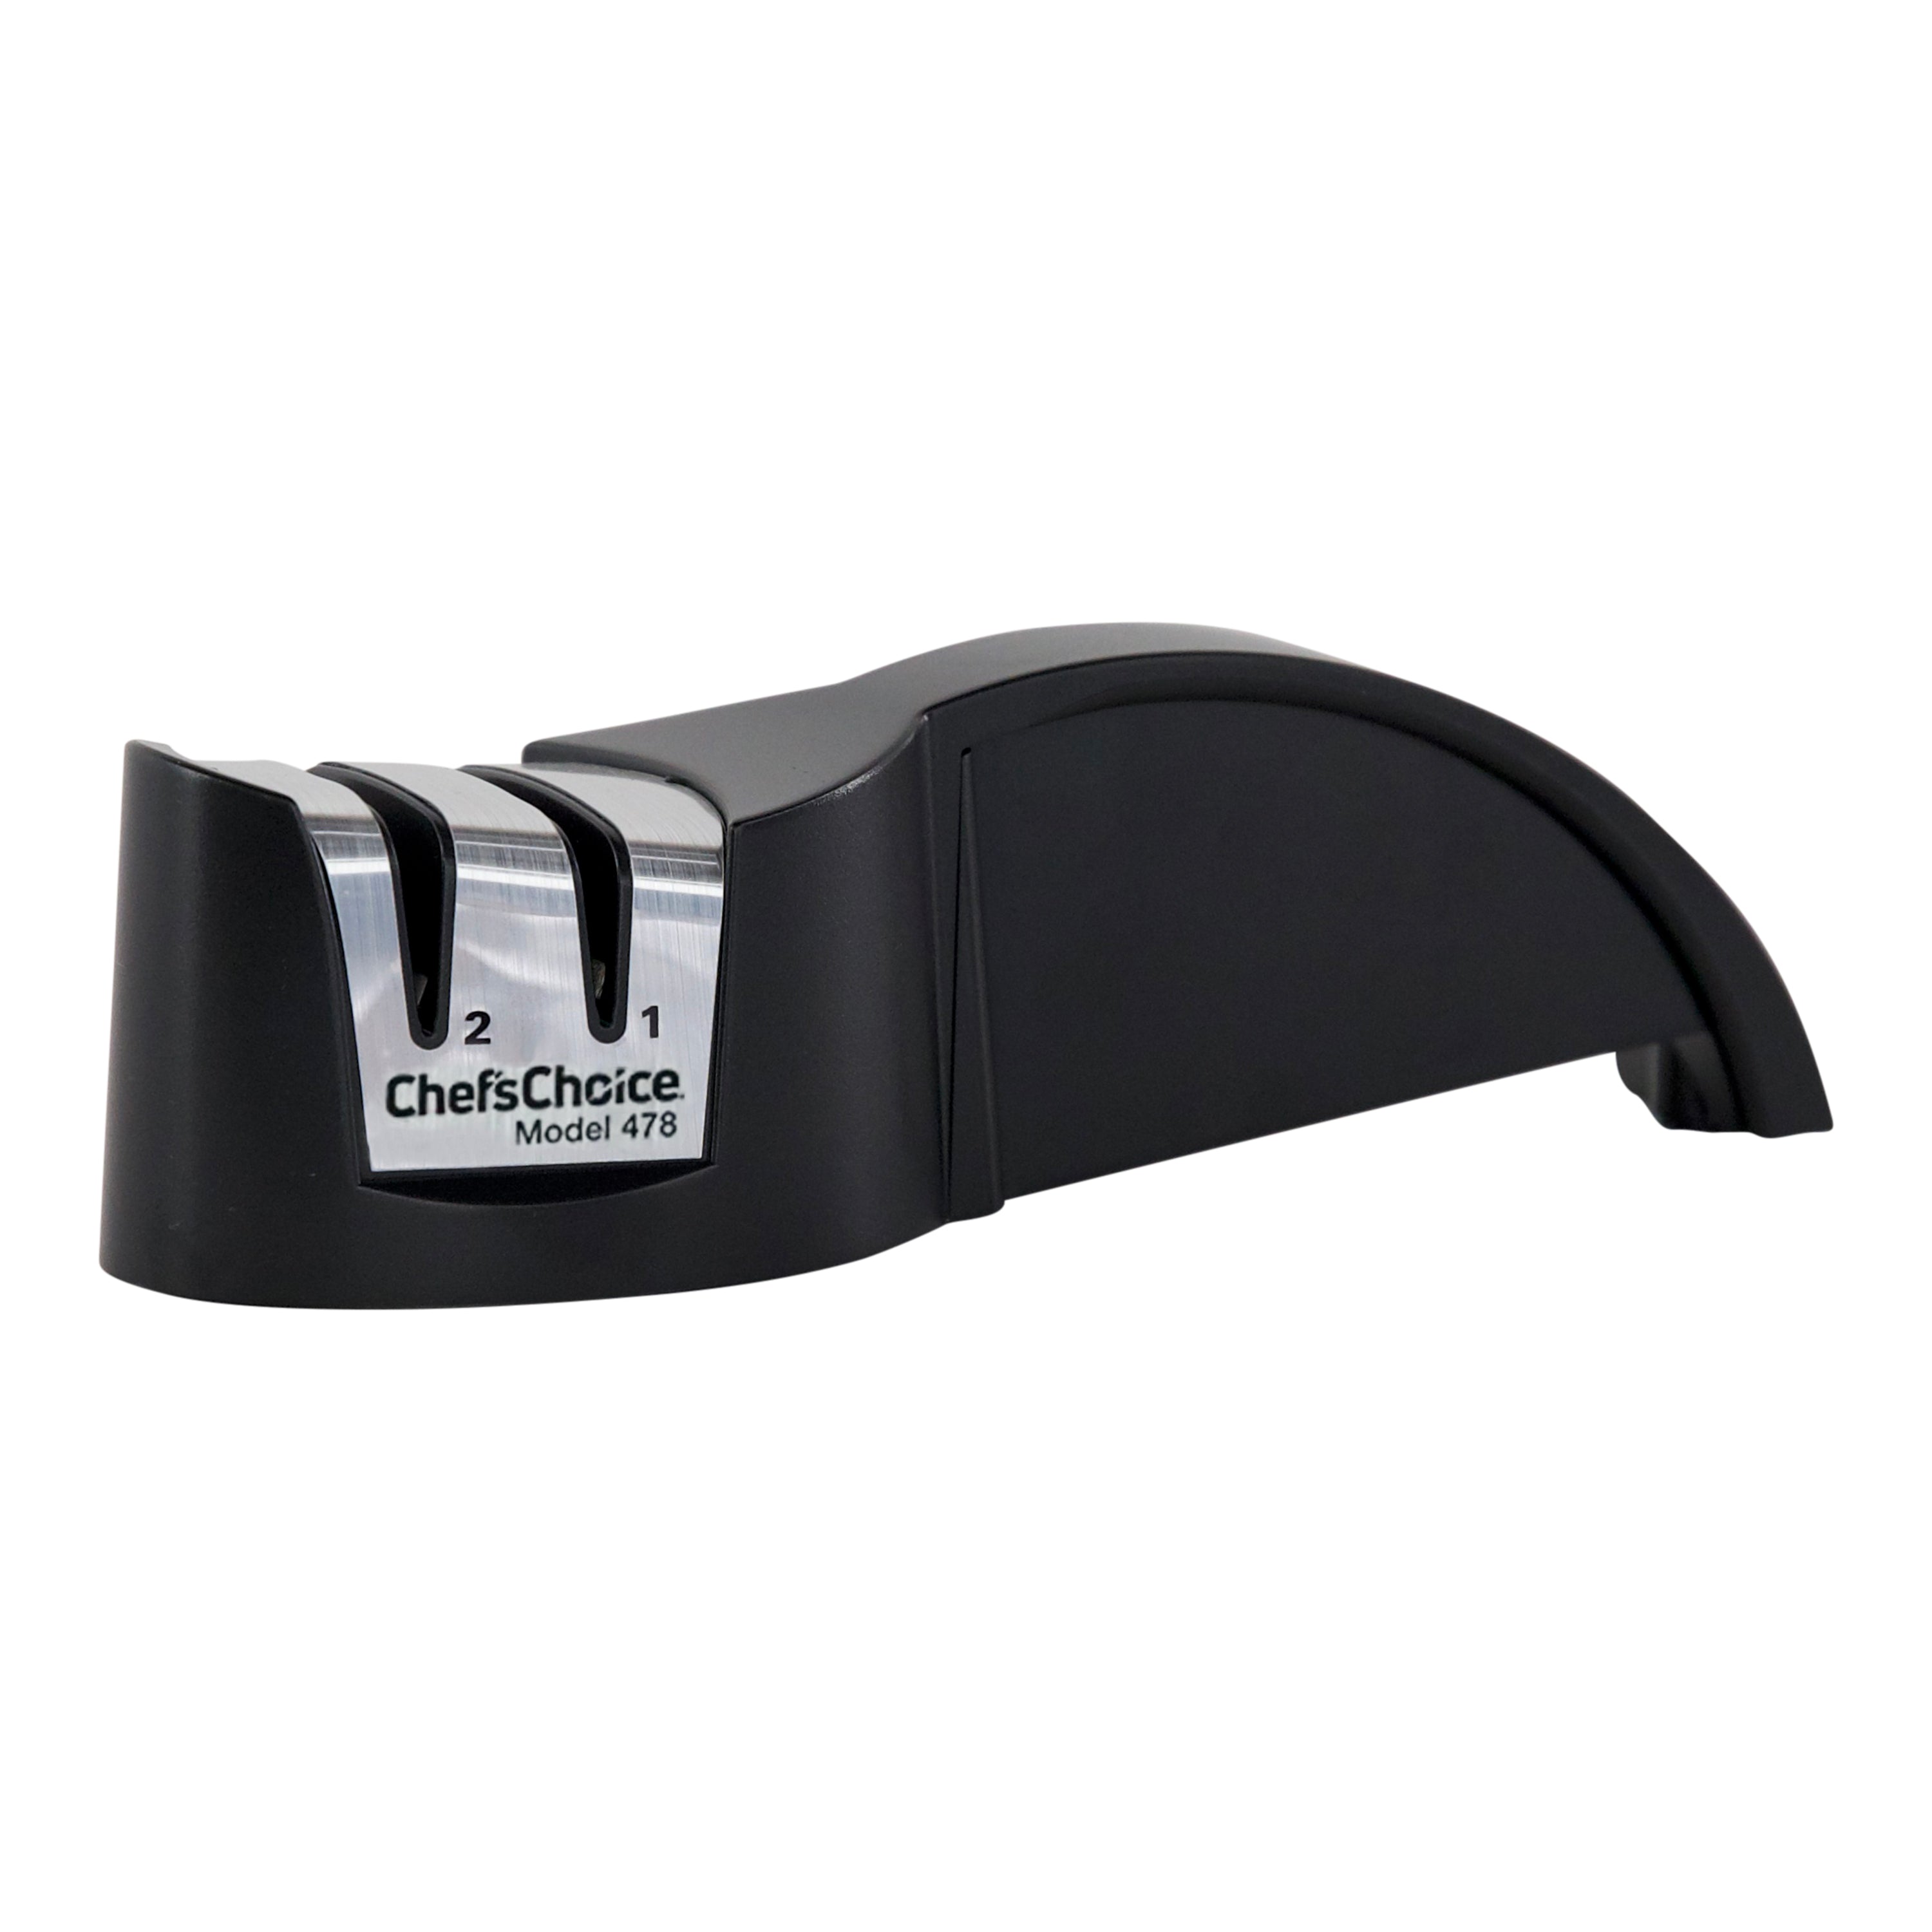 Chef's Choice Diamond Hone 120 Edgeselect Plus, Knife Sharpeners 0120108 ,  $9.73 Off with Free S&H — CampSaver